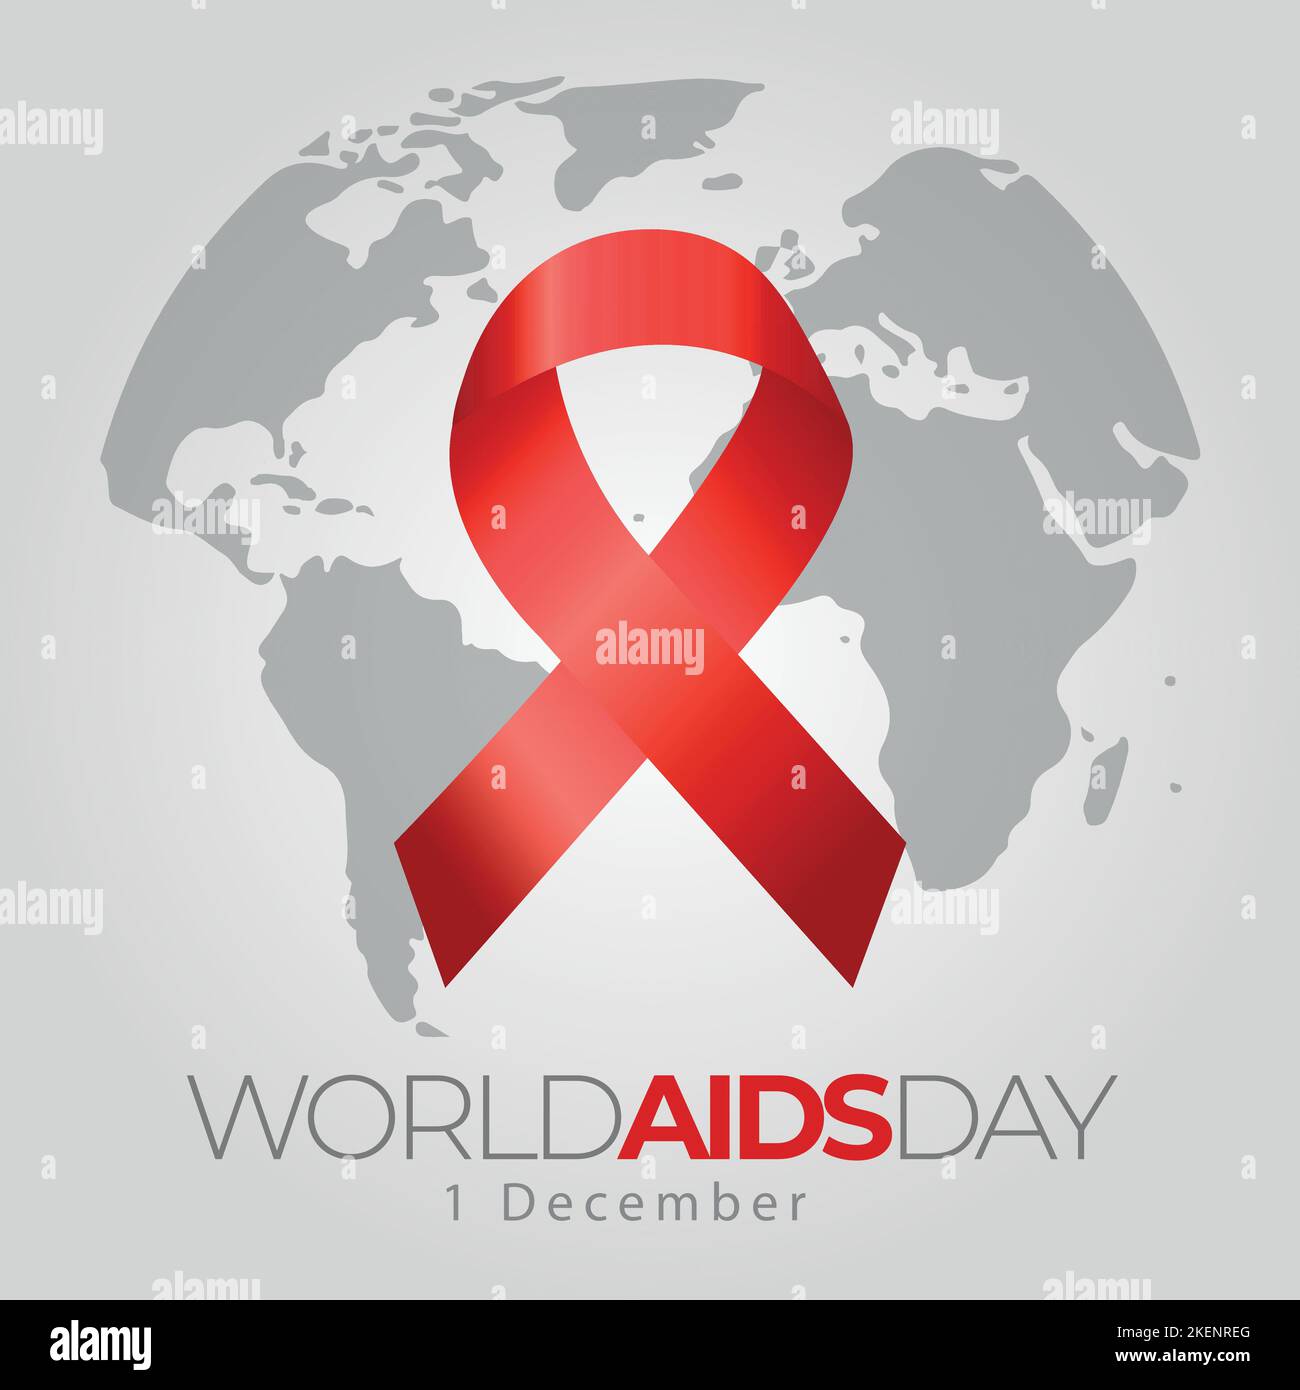 Vector in square format of a red ribbon, symbol of world aids day on the world map. december 1st hiv day Stock Vector